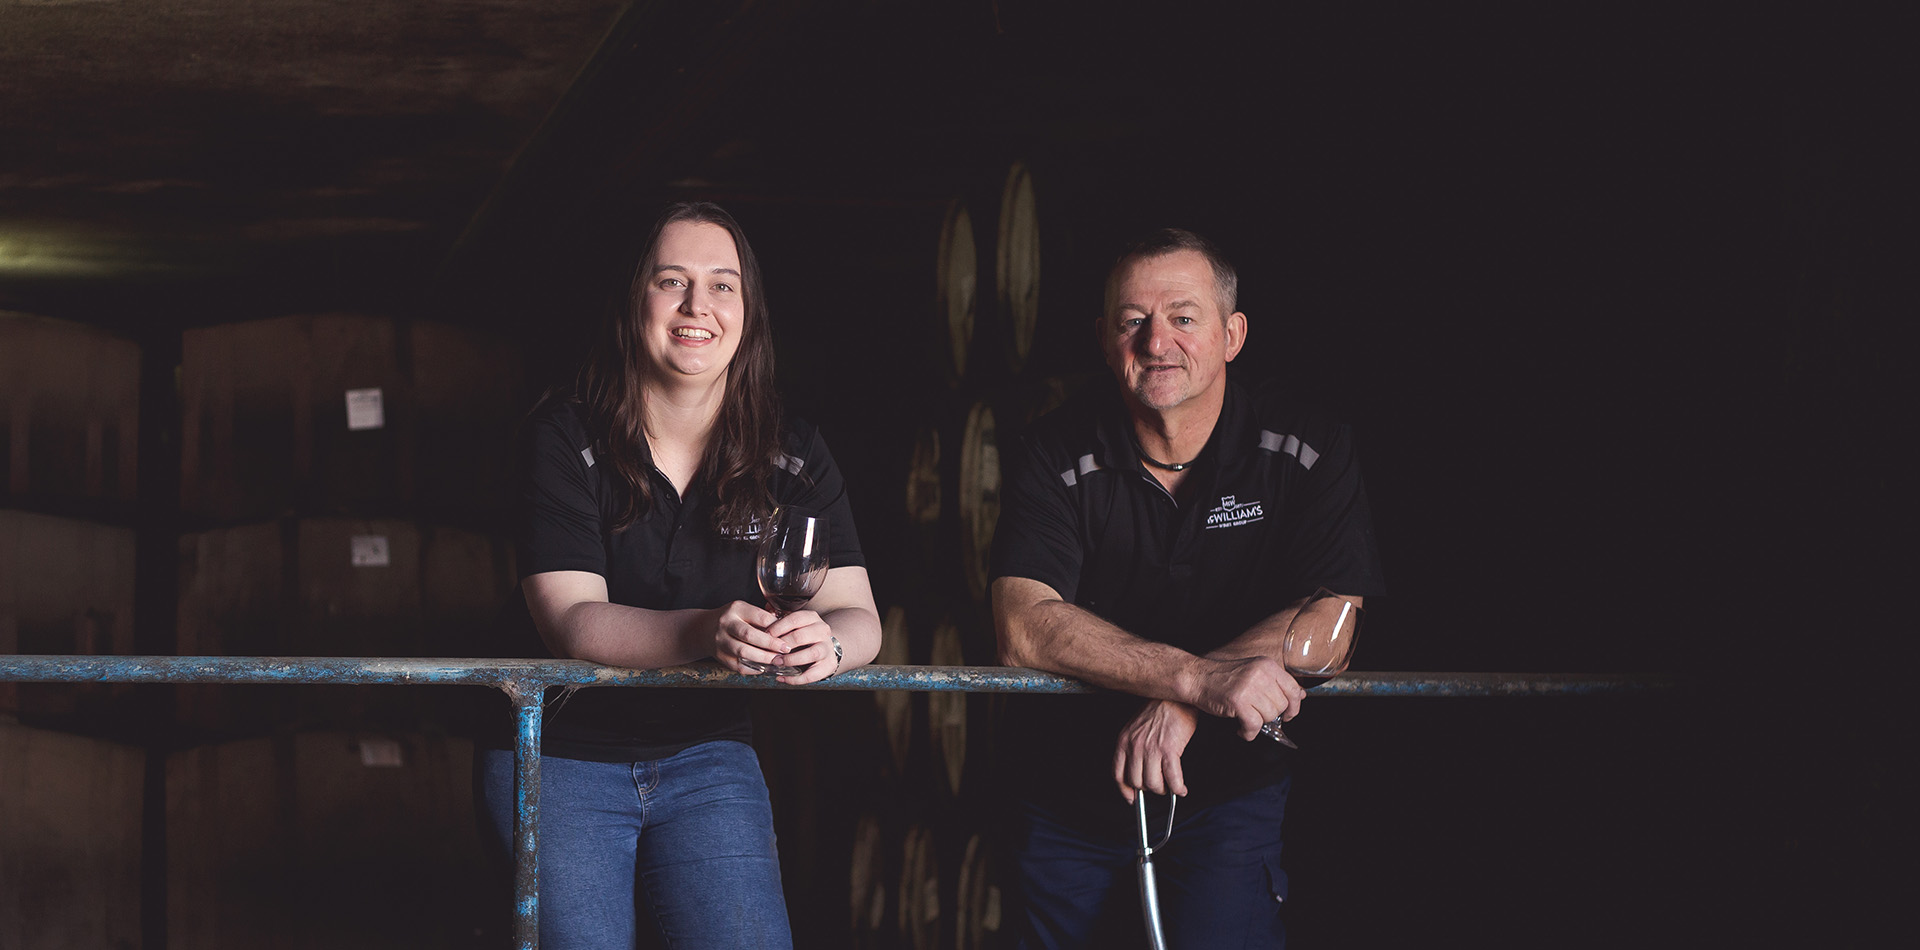 OUR WINEMAKERS